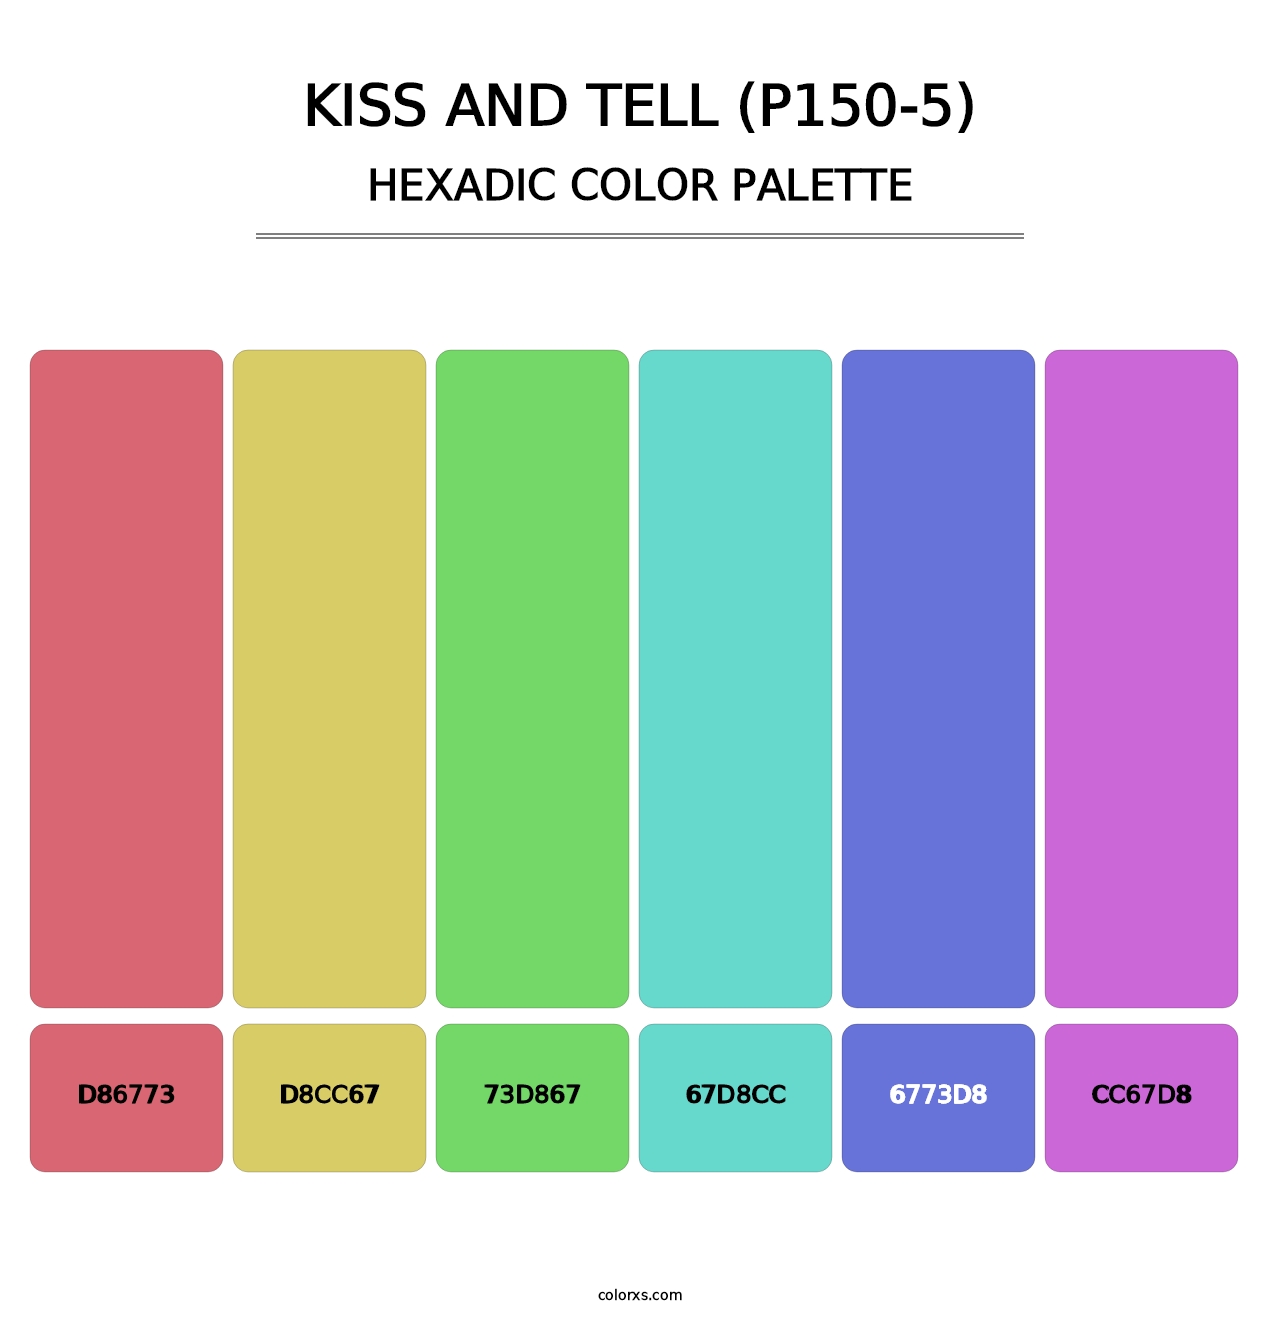 Kiss And Tell (P150-5) - Hexadic Color Palette